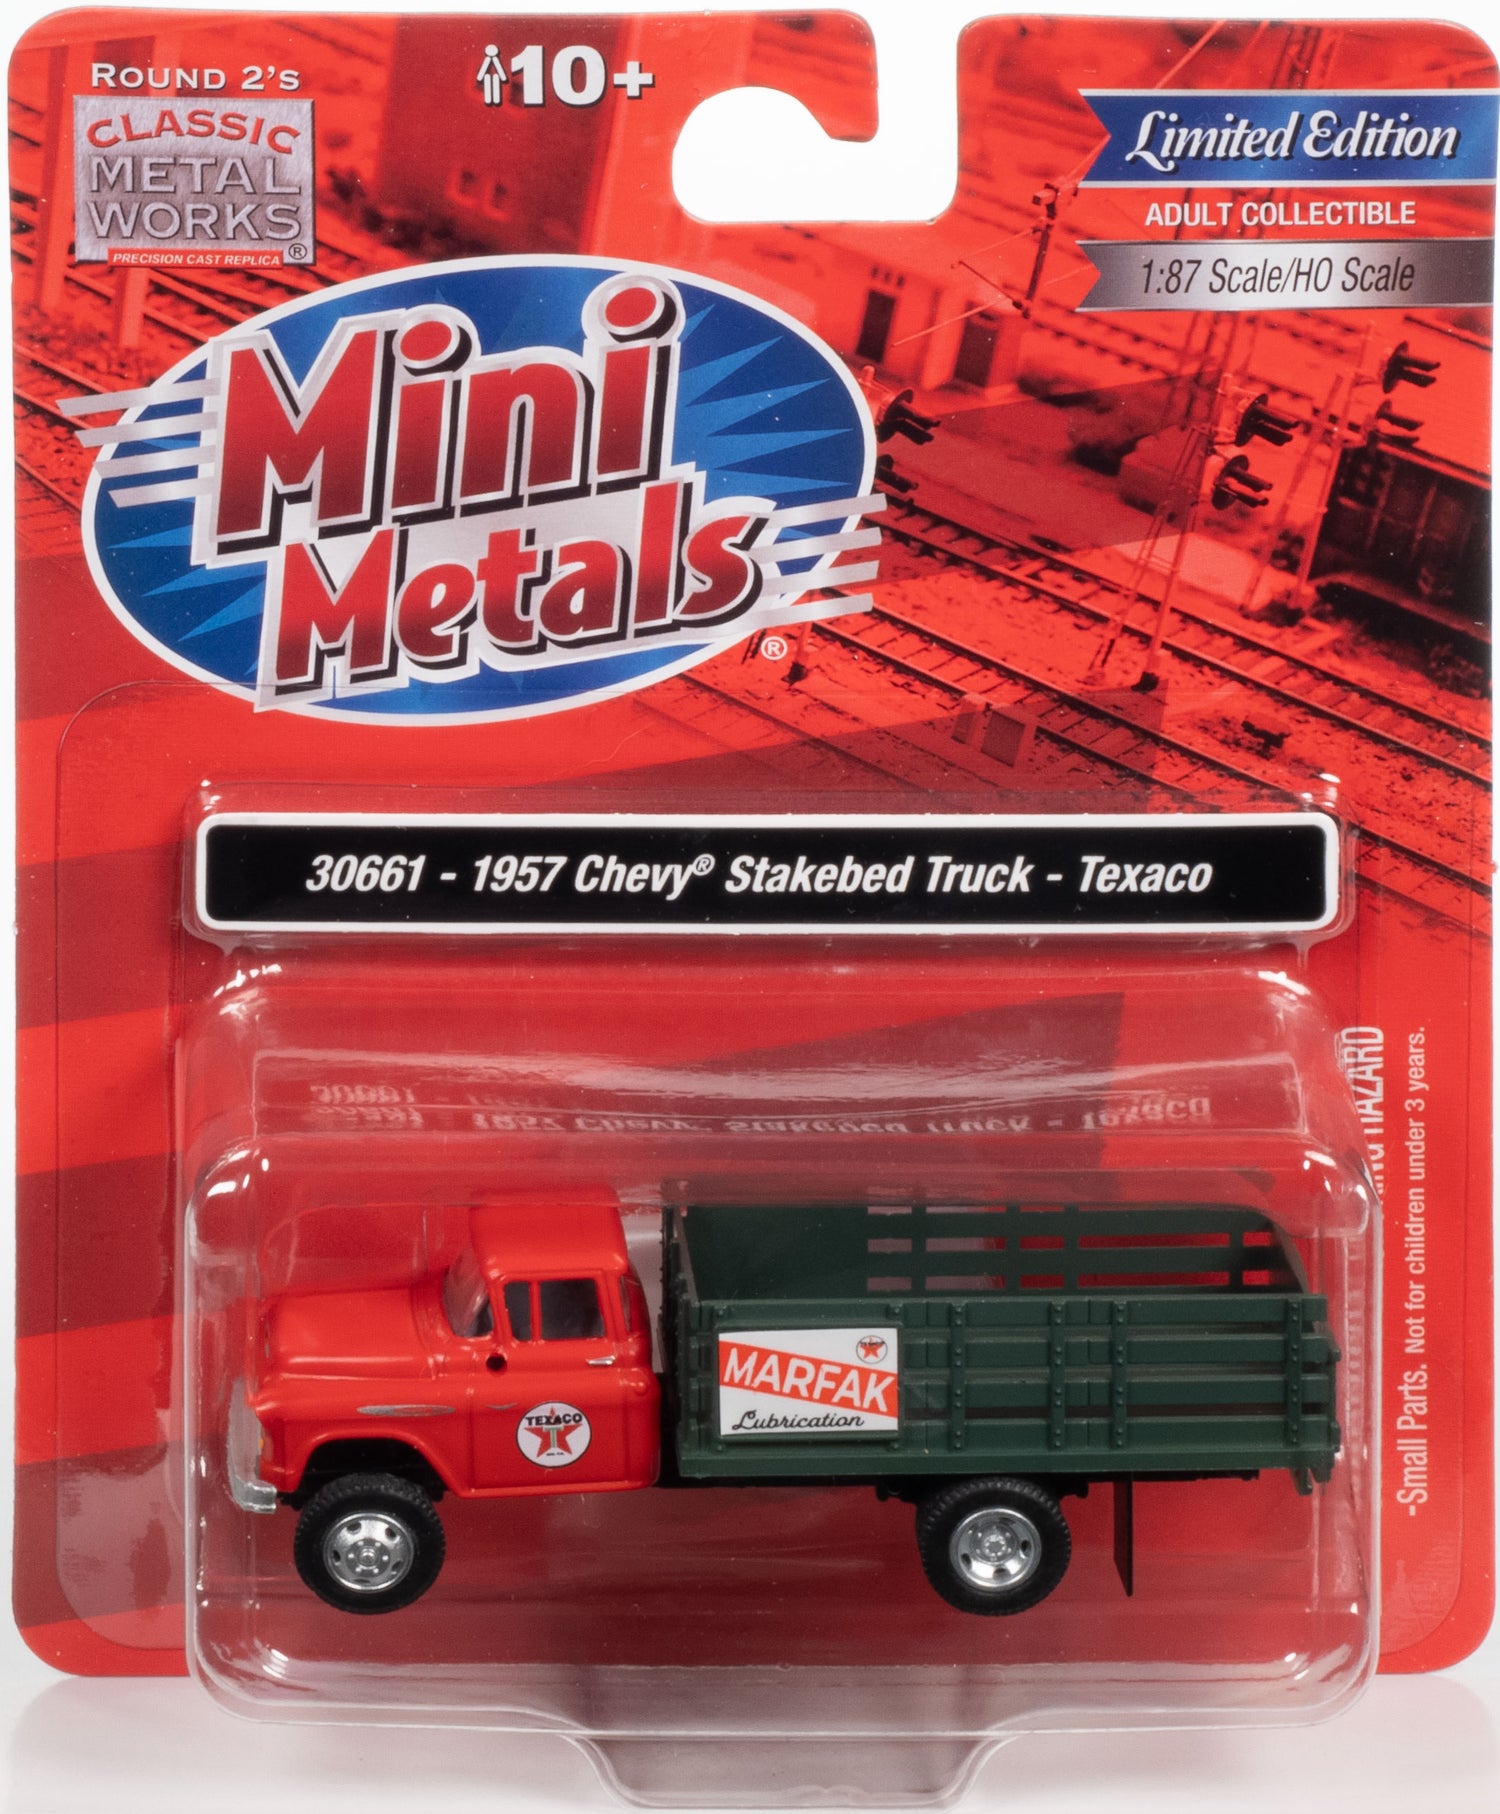 Classic Metal Works 1957 Chevy Stakebed Truck (Texaco) 1:87 HO Scale